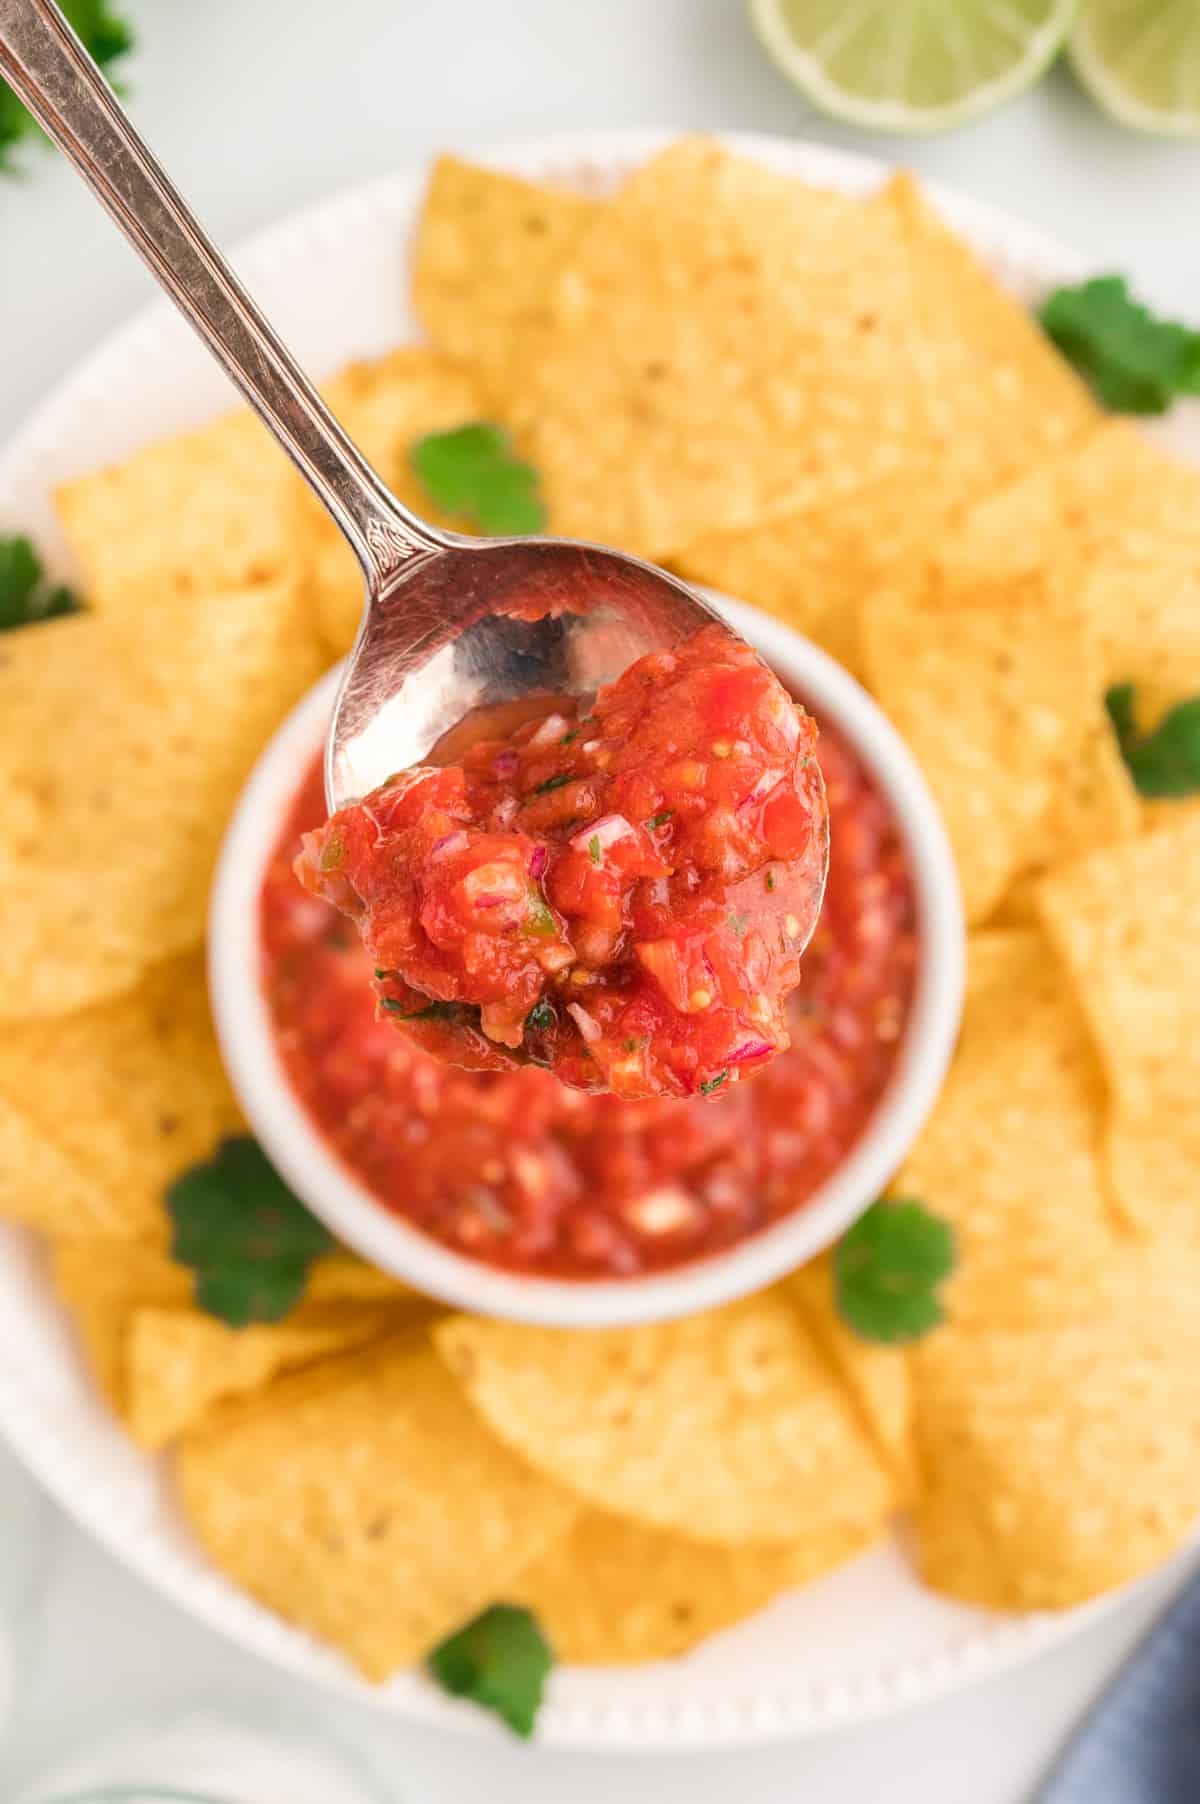 A bowl of salsa with a spoon scooping salsa out. A platter of tortilla chips is in the background.